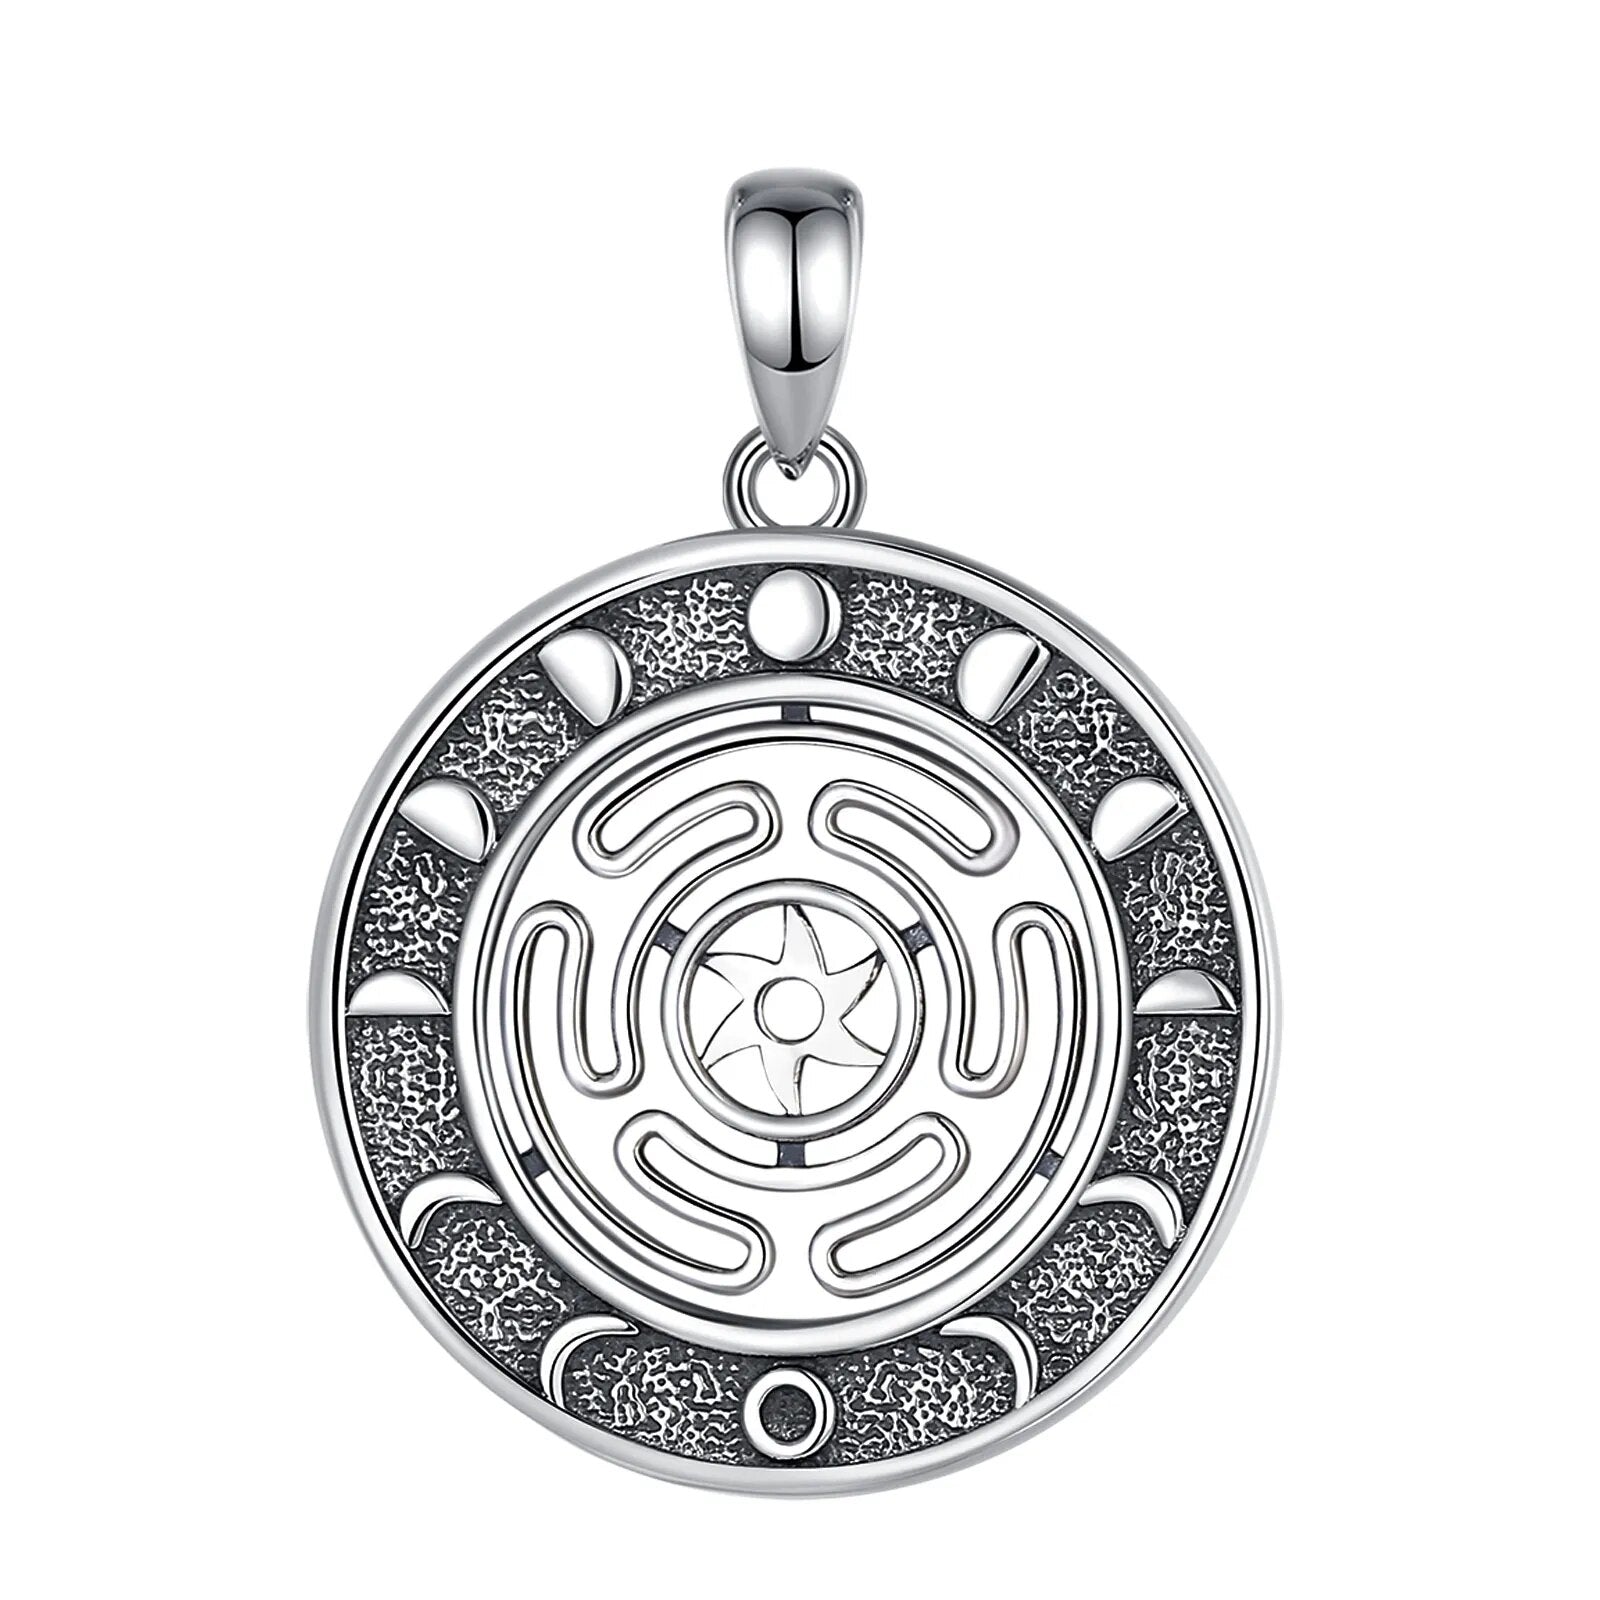 Hekate Wheel Necklace Moon Phases Witchcraft Jewelry-MoonChildWorld